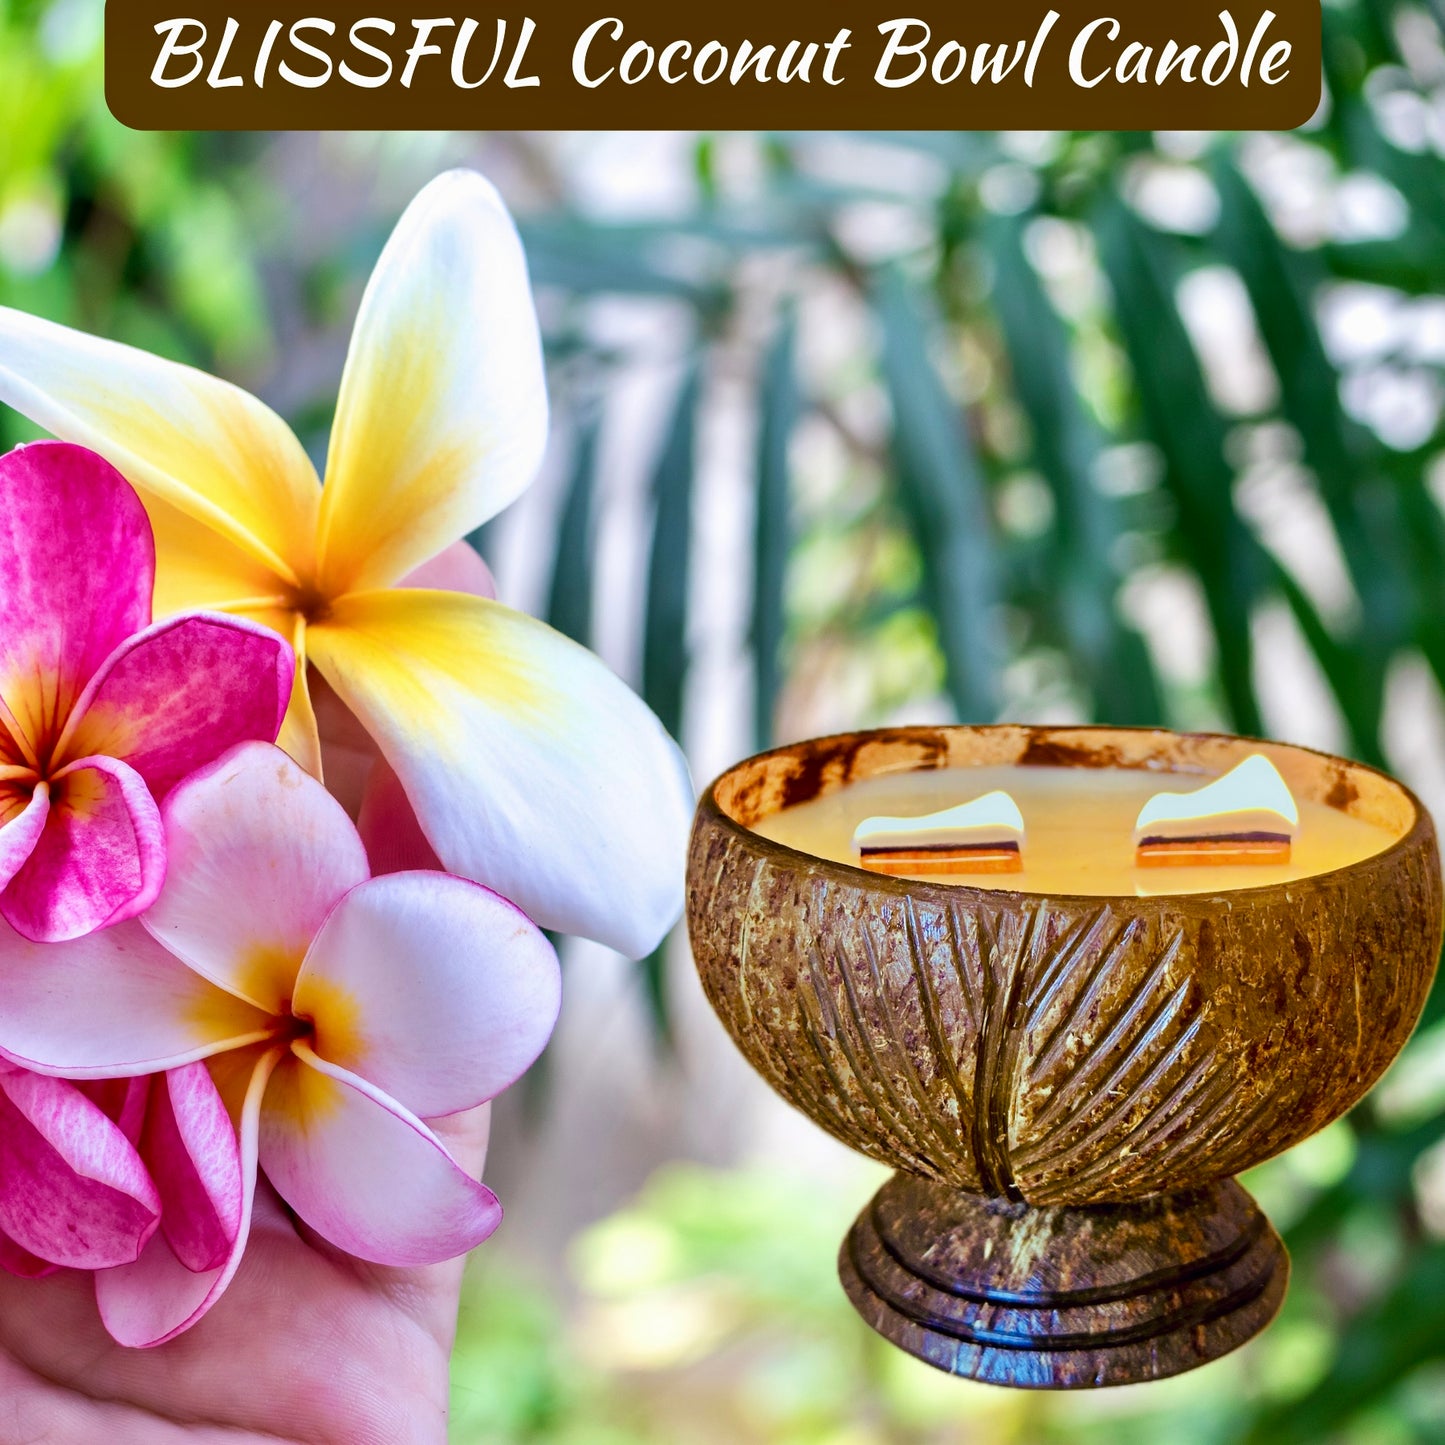 BLISSFUL Coconut Bowl Candle